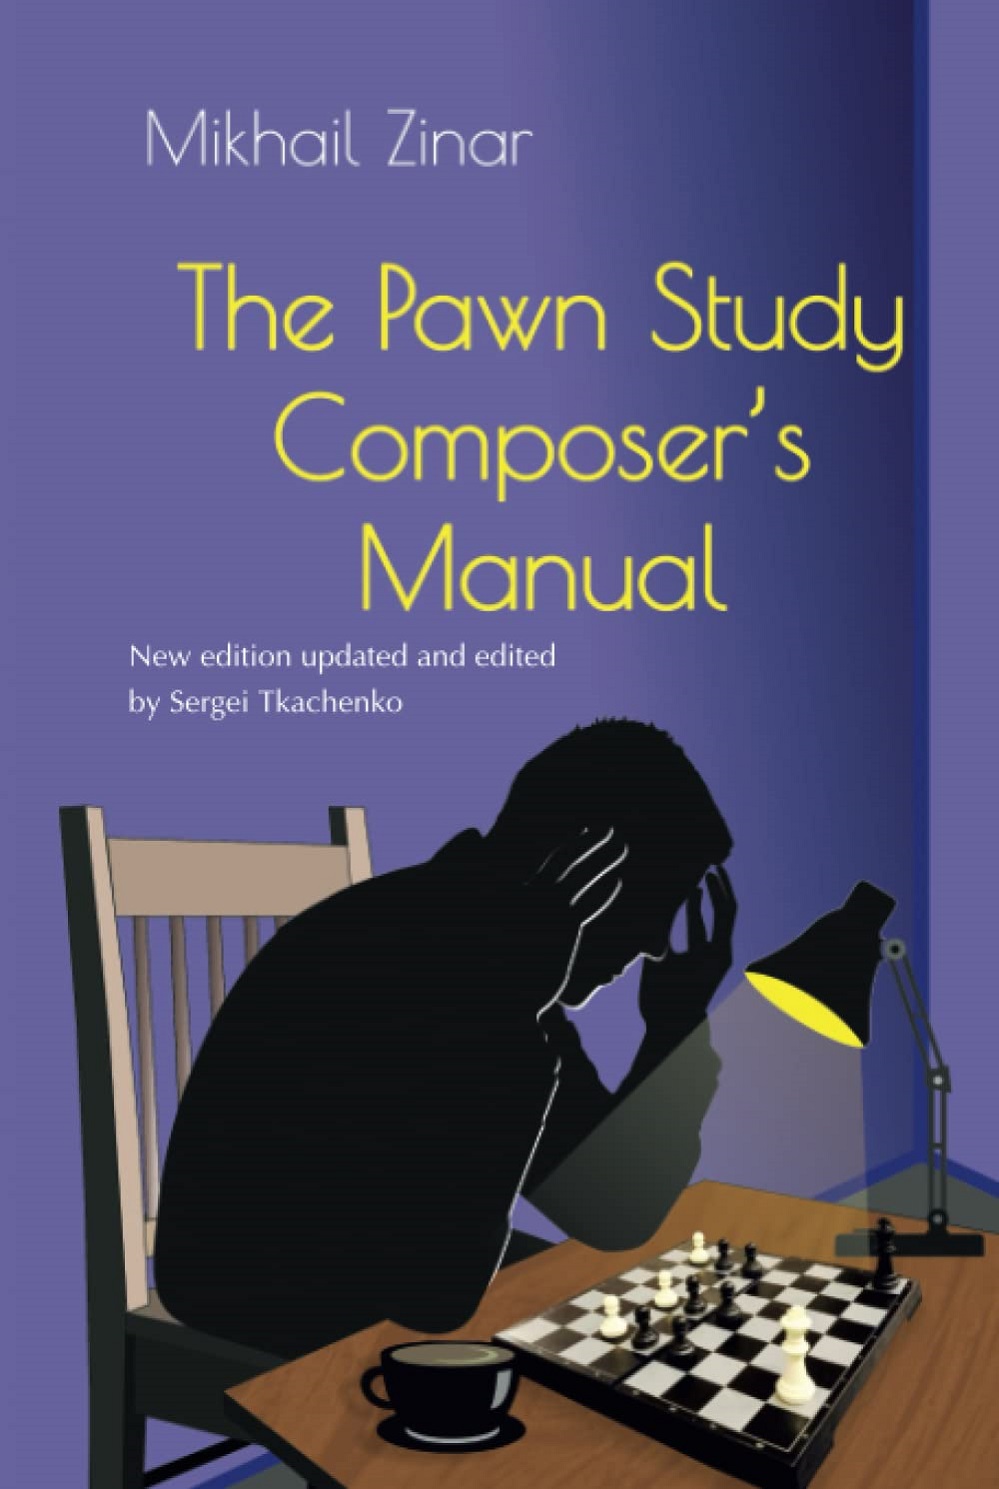 The Pawn Study Composer's Manual (paperback)